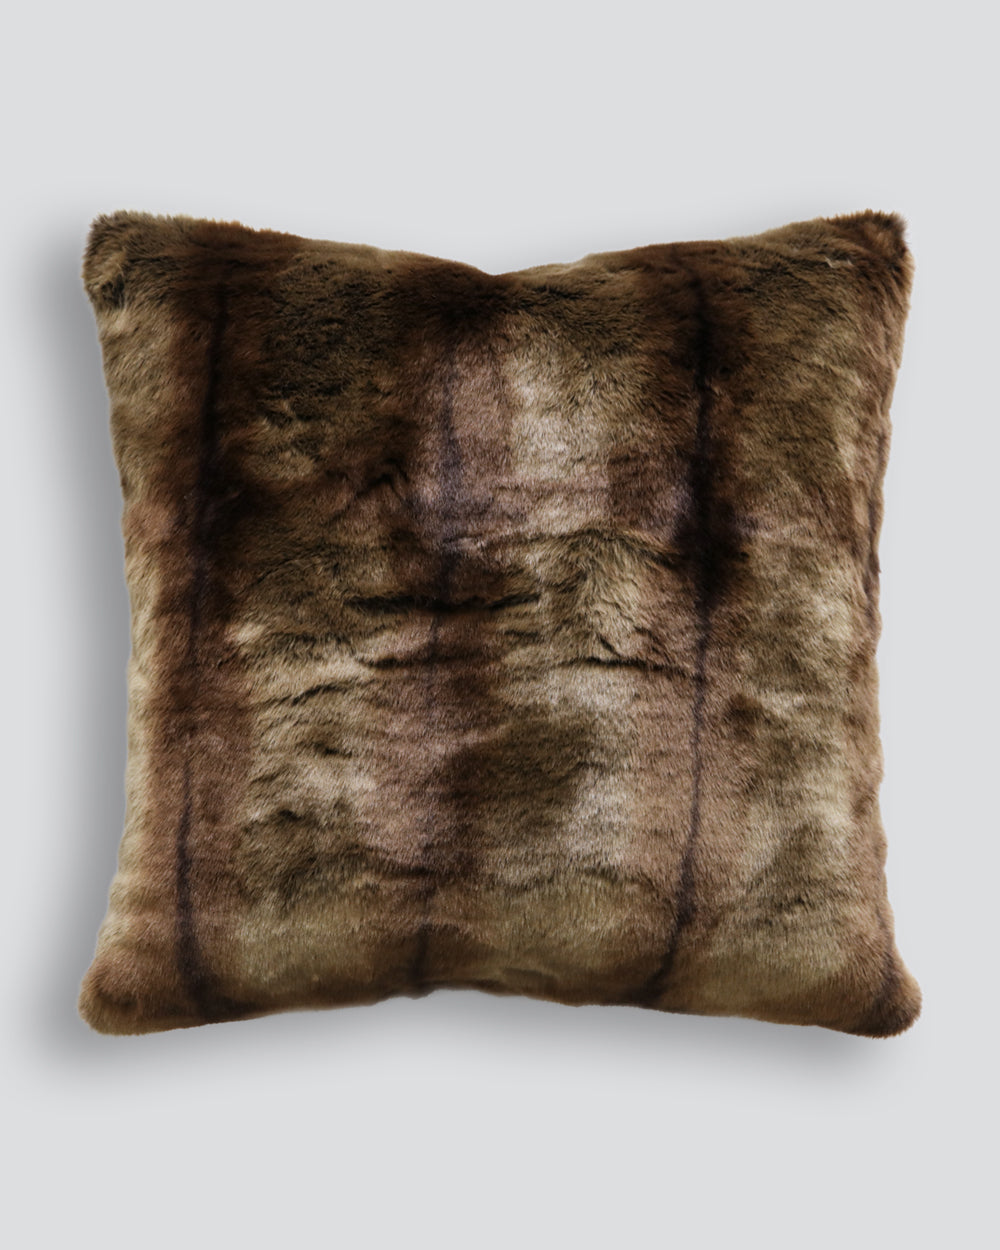 Heirloom Red Lemur Cushions in Faux Fur are available from Make Your House A Home Premium Stockist. Furniture Store Bendigo, Victoria. Australia Wide Delivery. Furtex Baya.